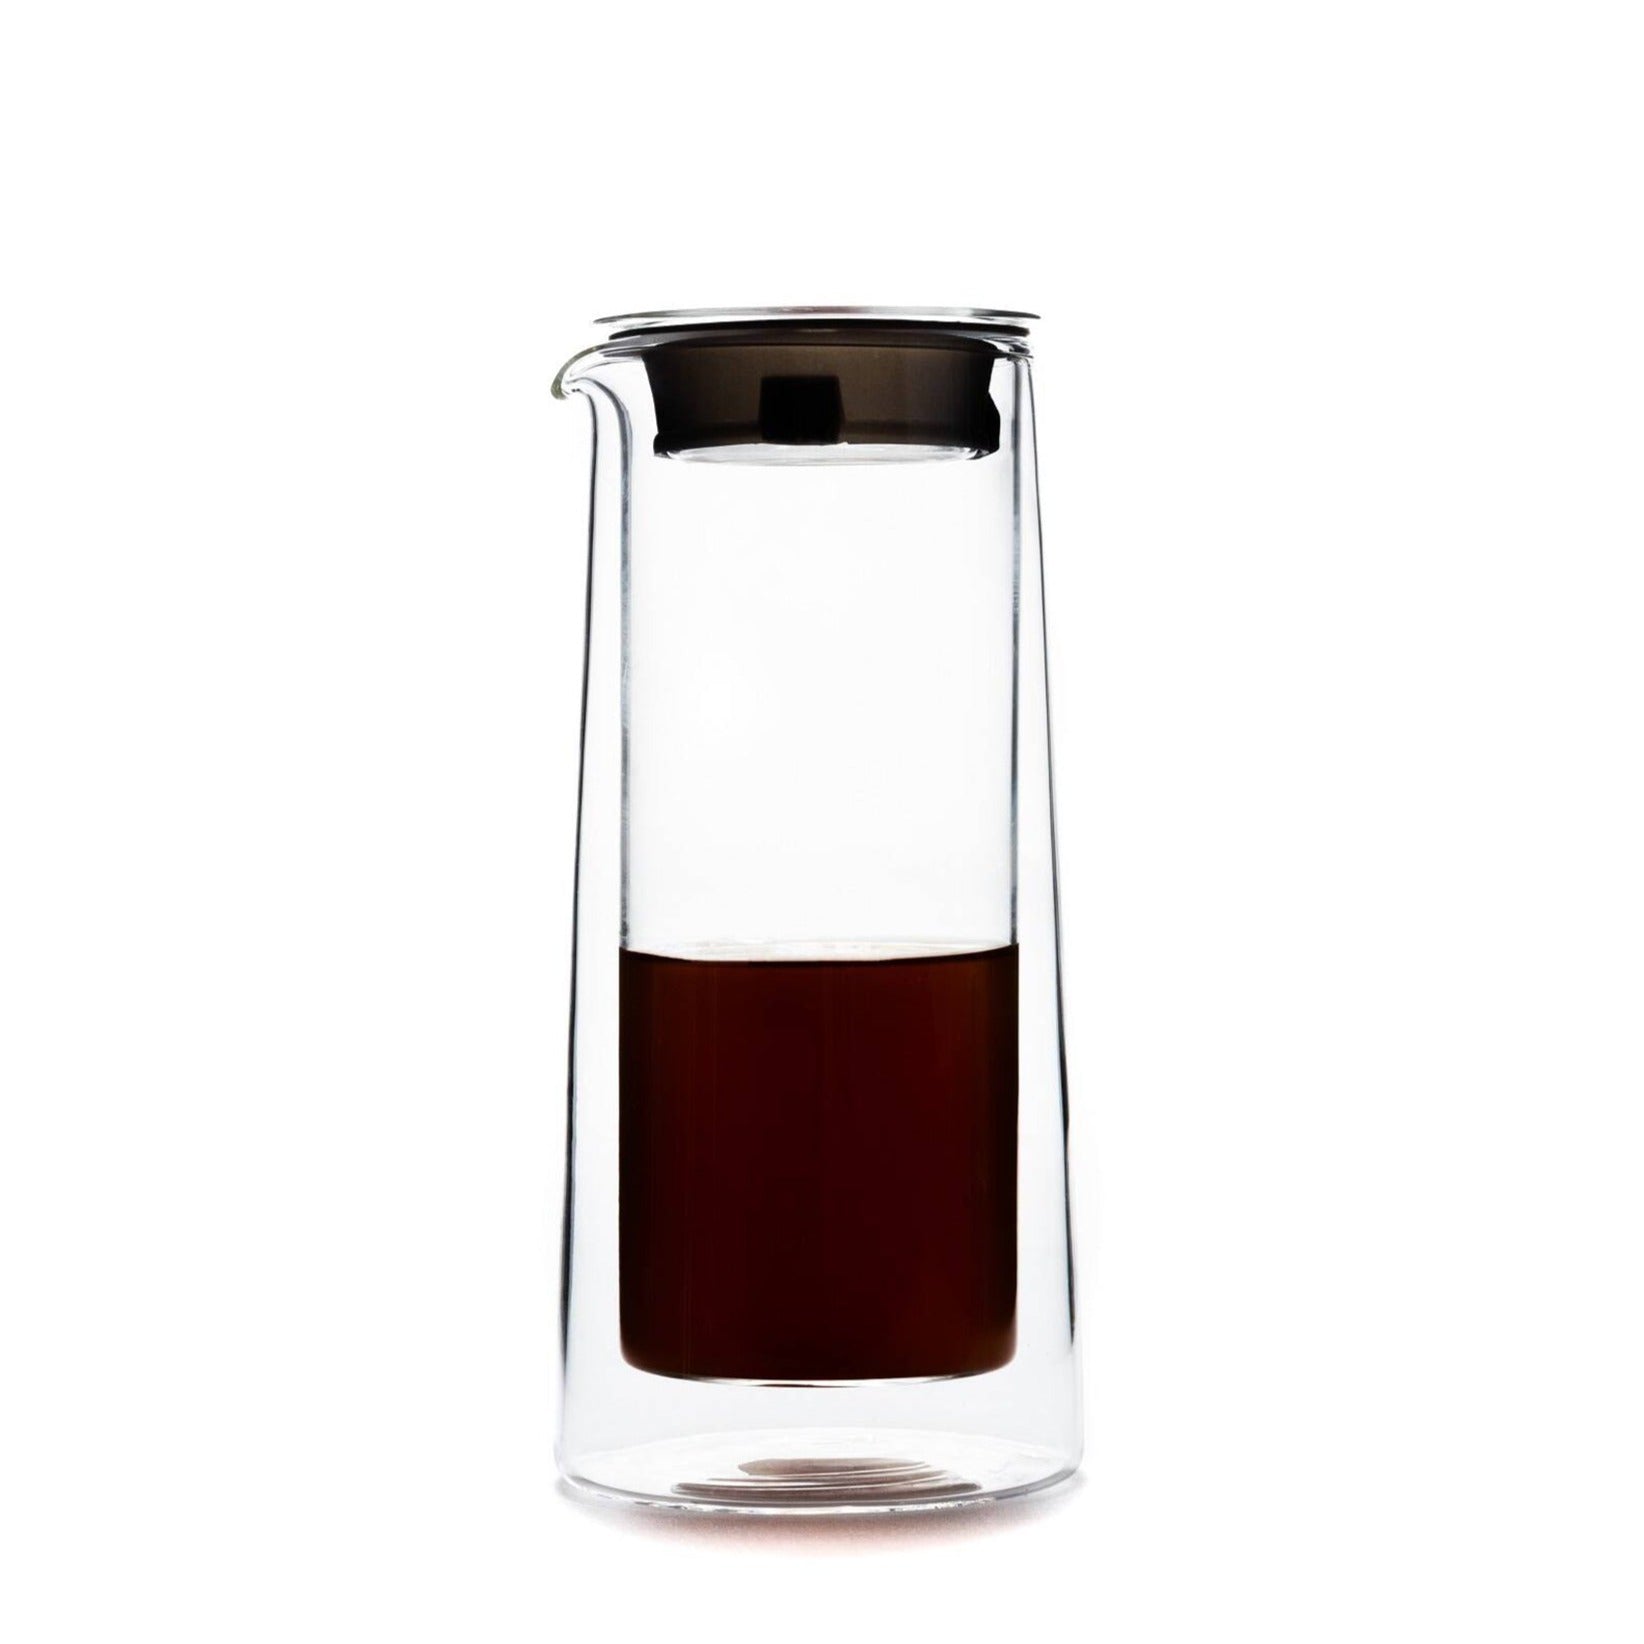 Filibuster Dual Wall Beverage DecanterFilibuster Dual Wall Beverage DecanterCollective Coffee RoastersHand crafted dual wall insulated glass decanter. Keeps your drink hot. 650ML